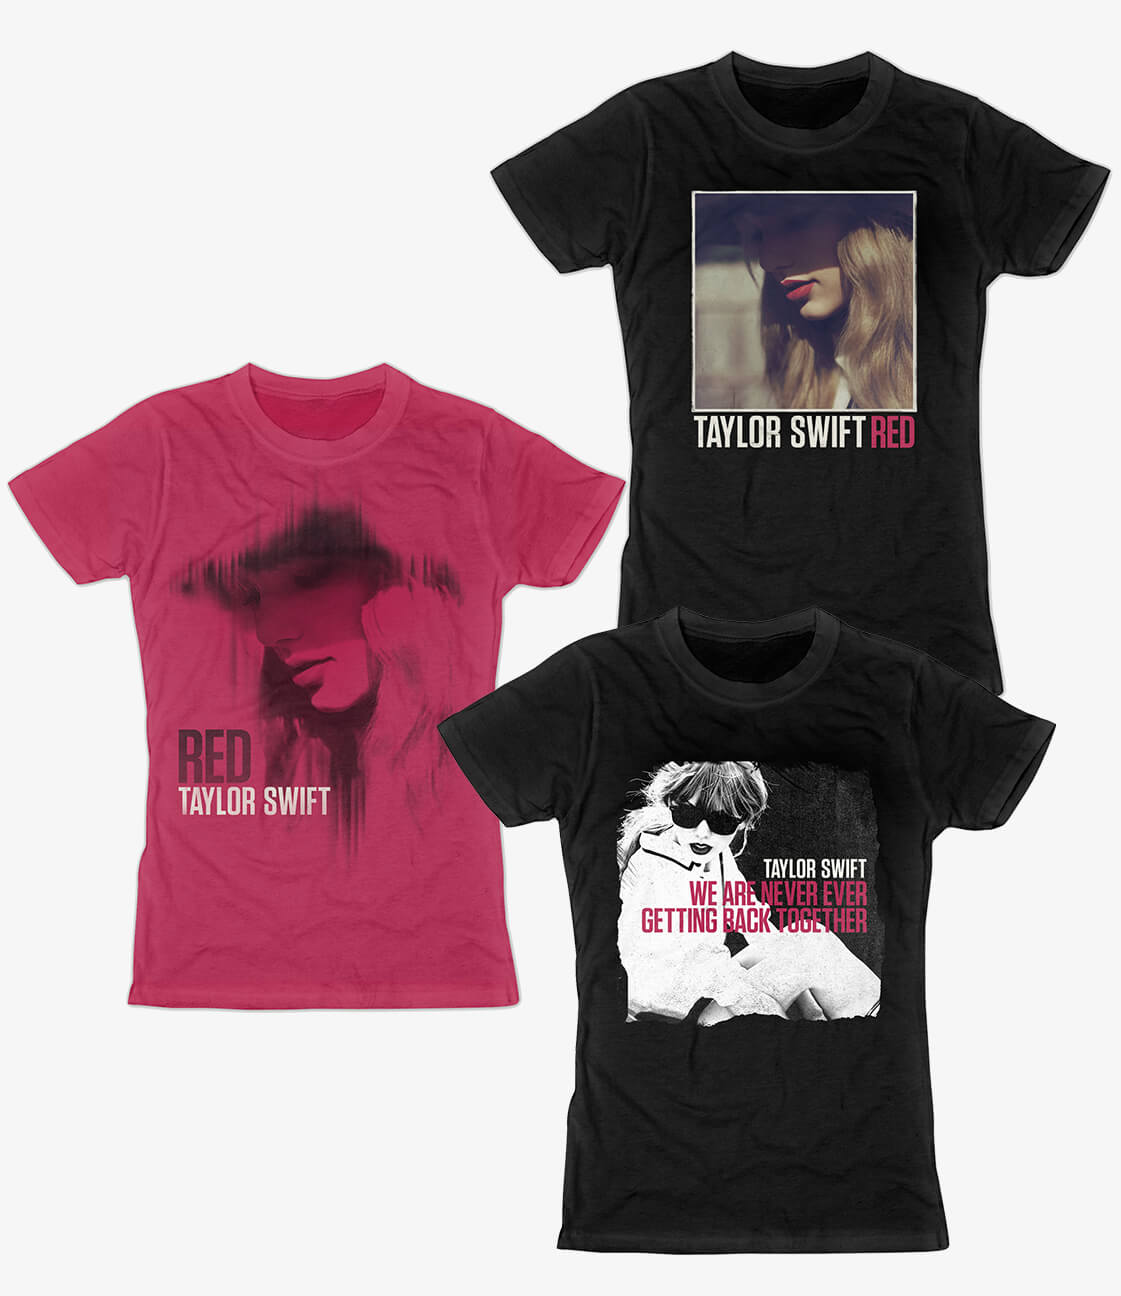 Taylor Swift Red Merchandise - ST8MNT BRAND AGENCY